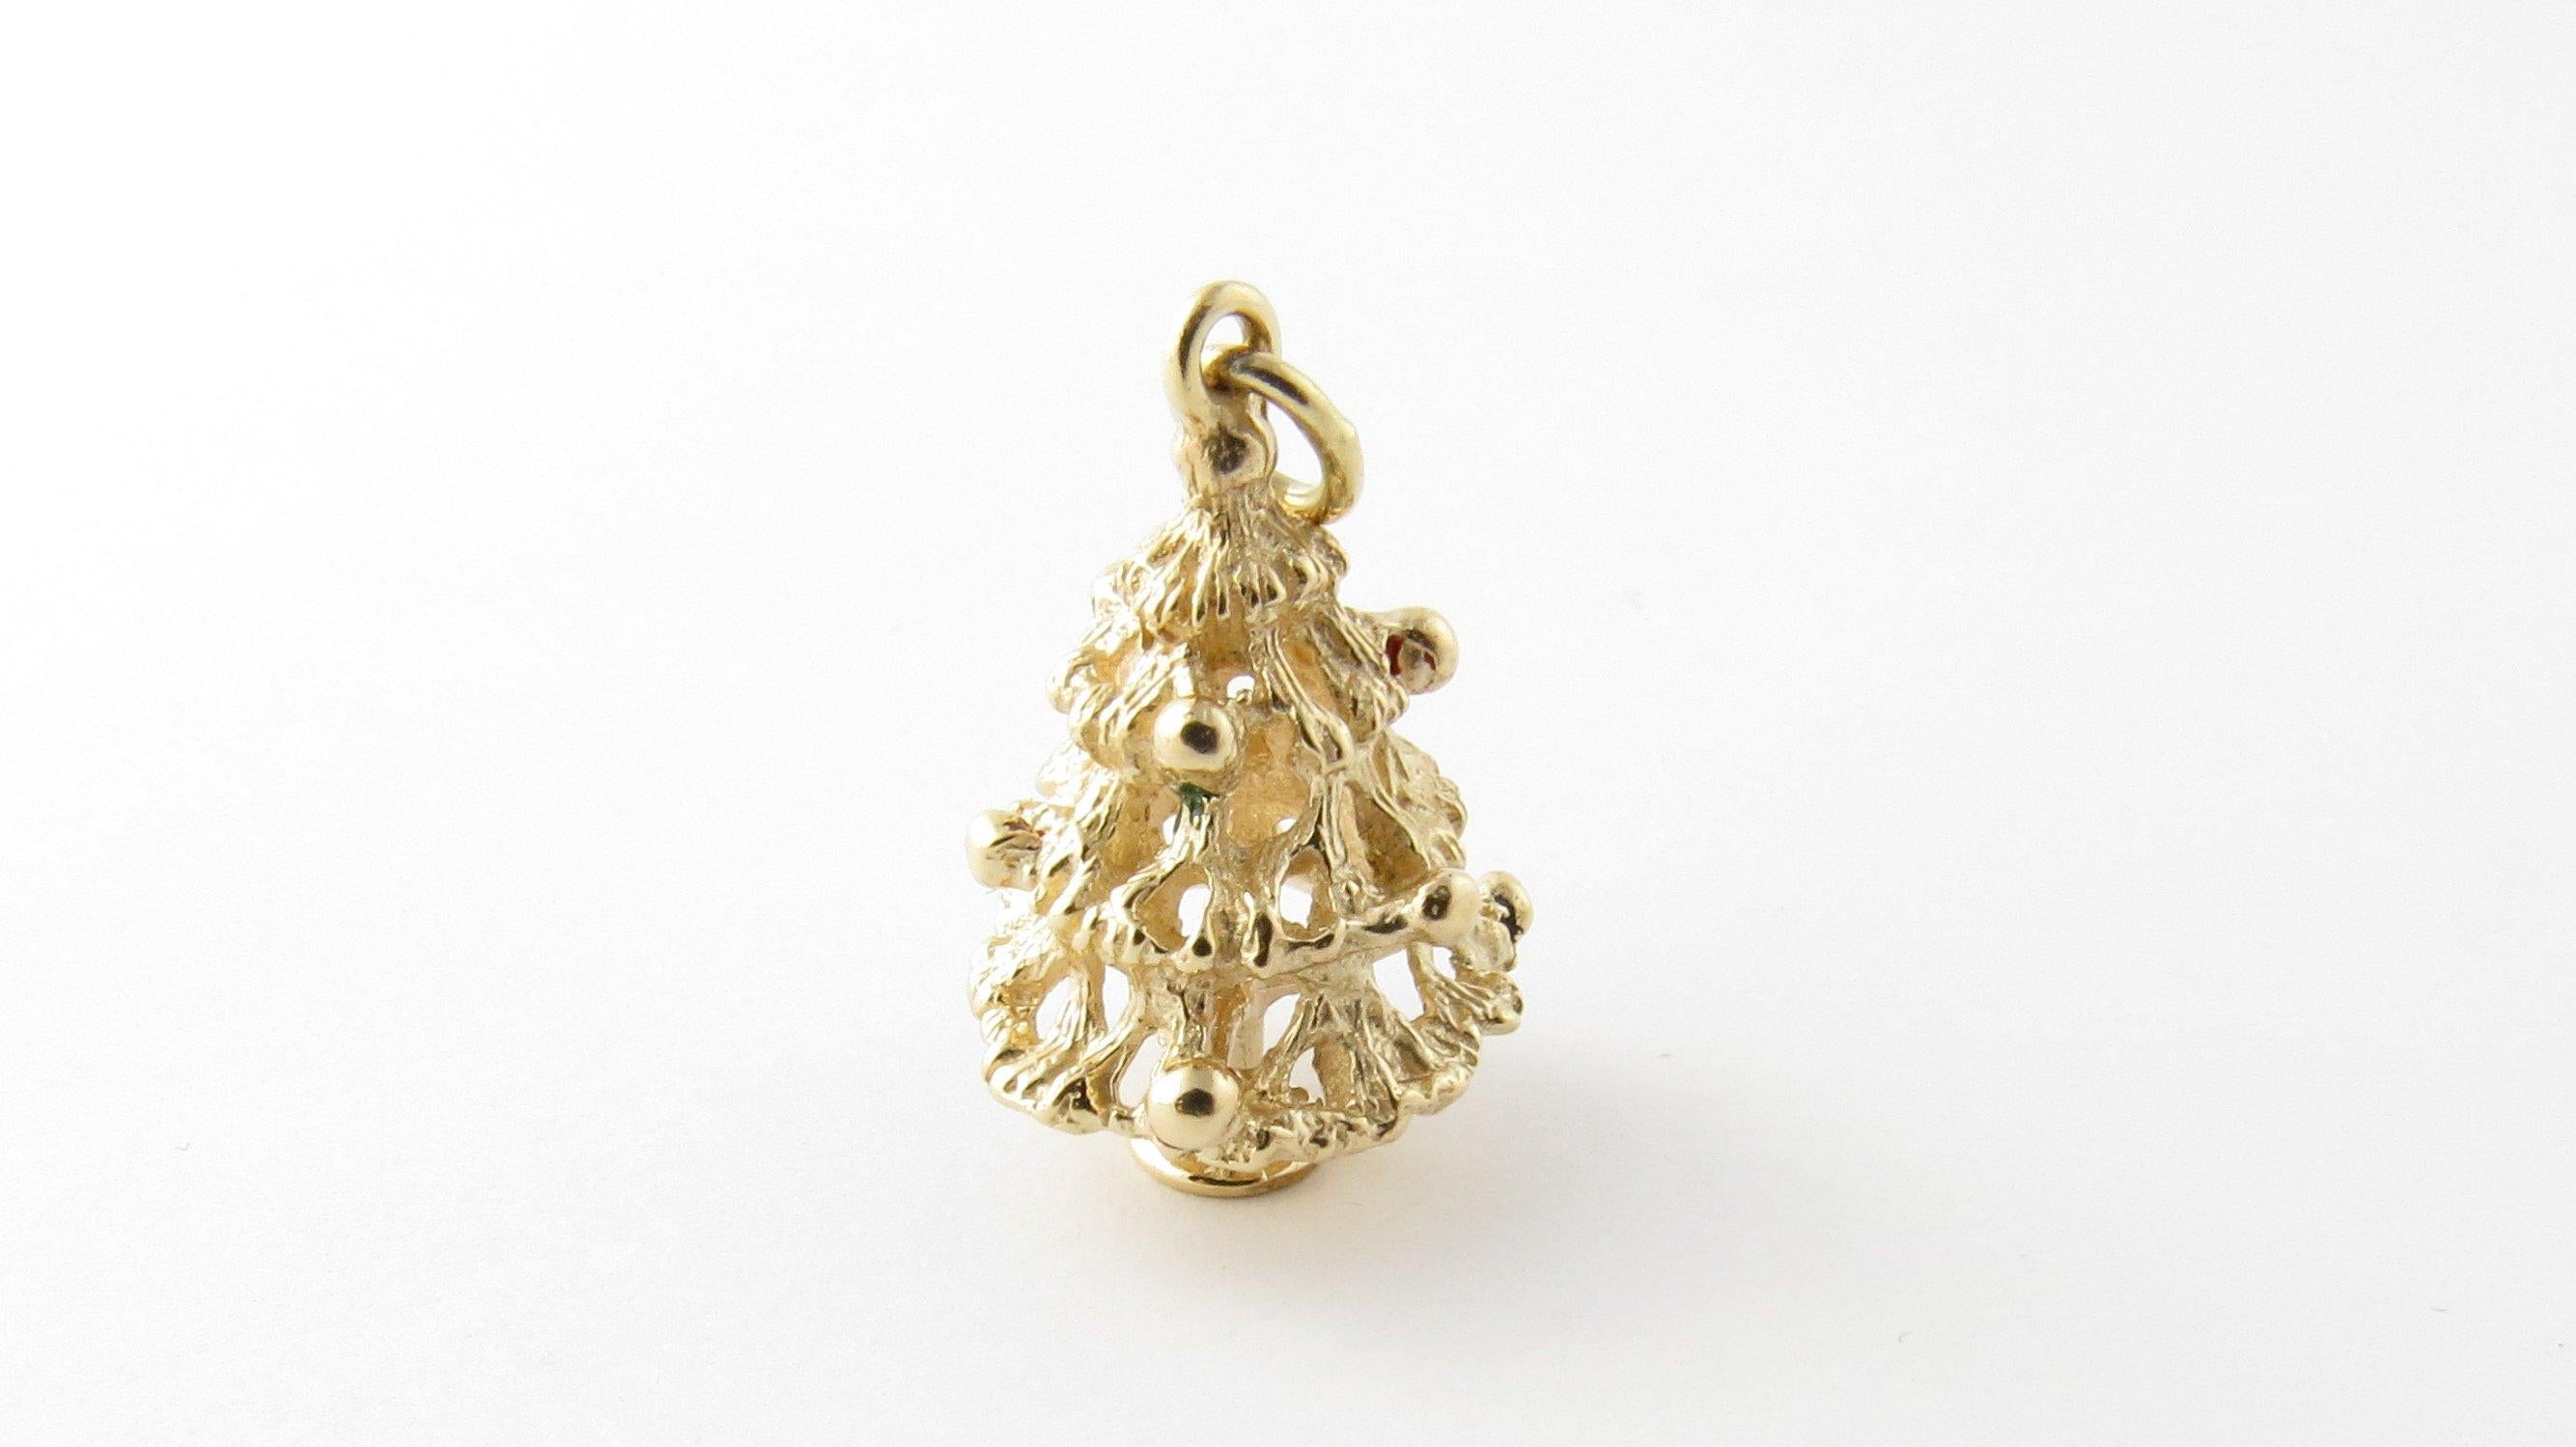 Vintage 14 Karat Yellow Gold Christmas Tree Charm - Carry the holiday spirit with you year round! This lovely 3D charm features a miniature Christmas tree meticulously detailed in 14K yellow gold.
Size: 21 mm x 13 mm (actual charm) Weight: 2.3 dwt.